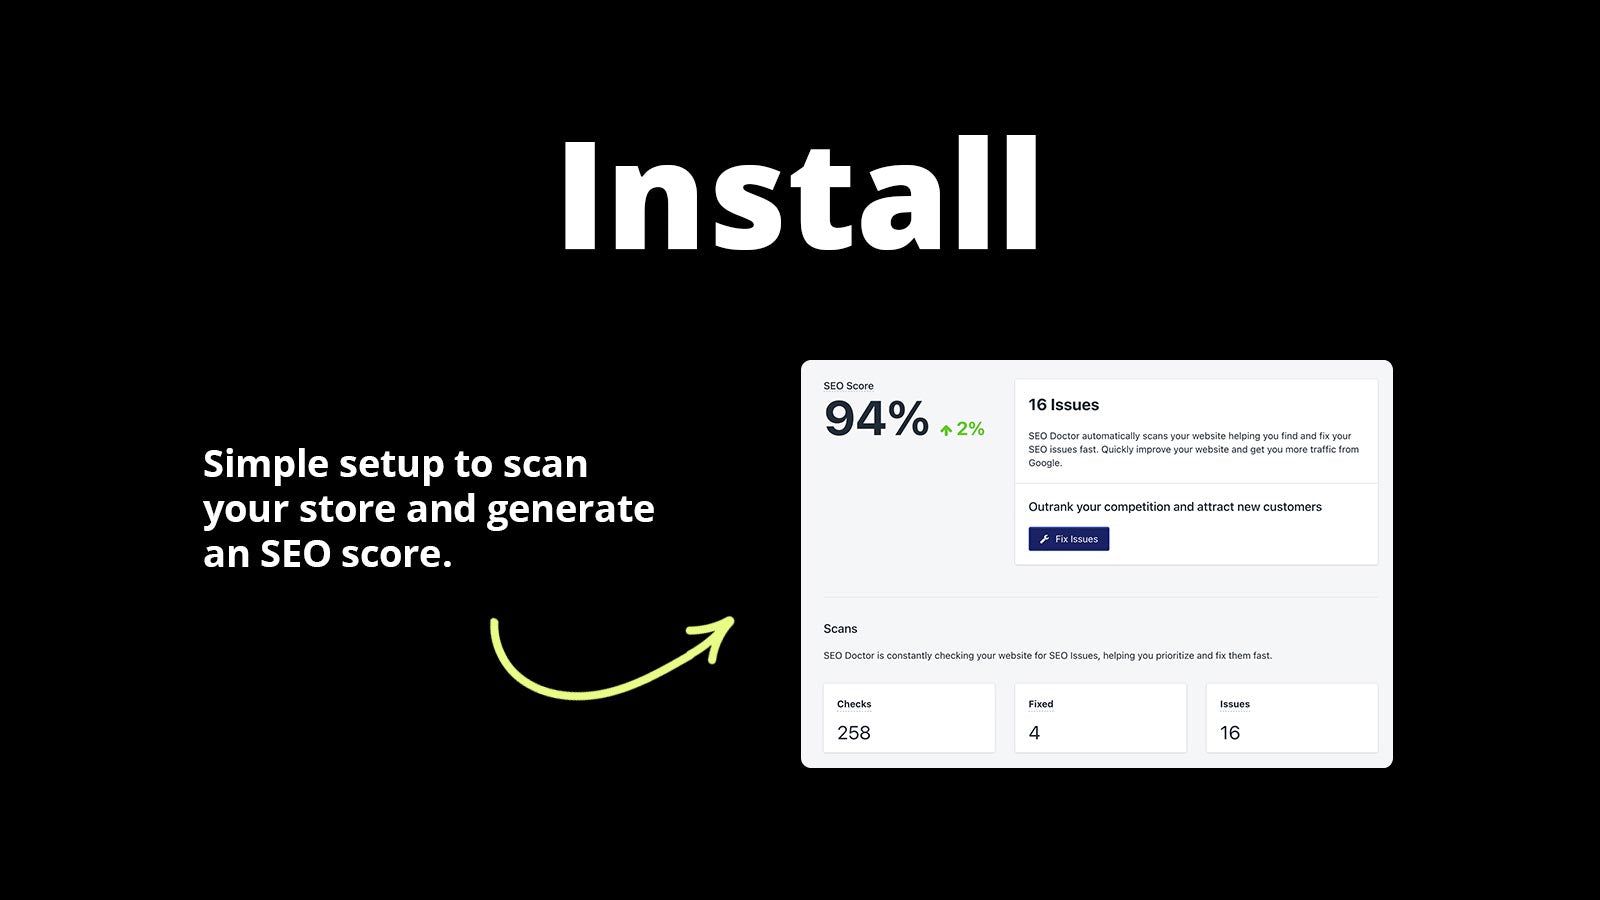 Install - Simple setup to scan your store and generate SEO score